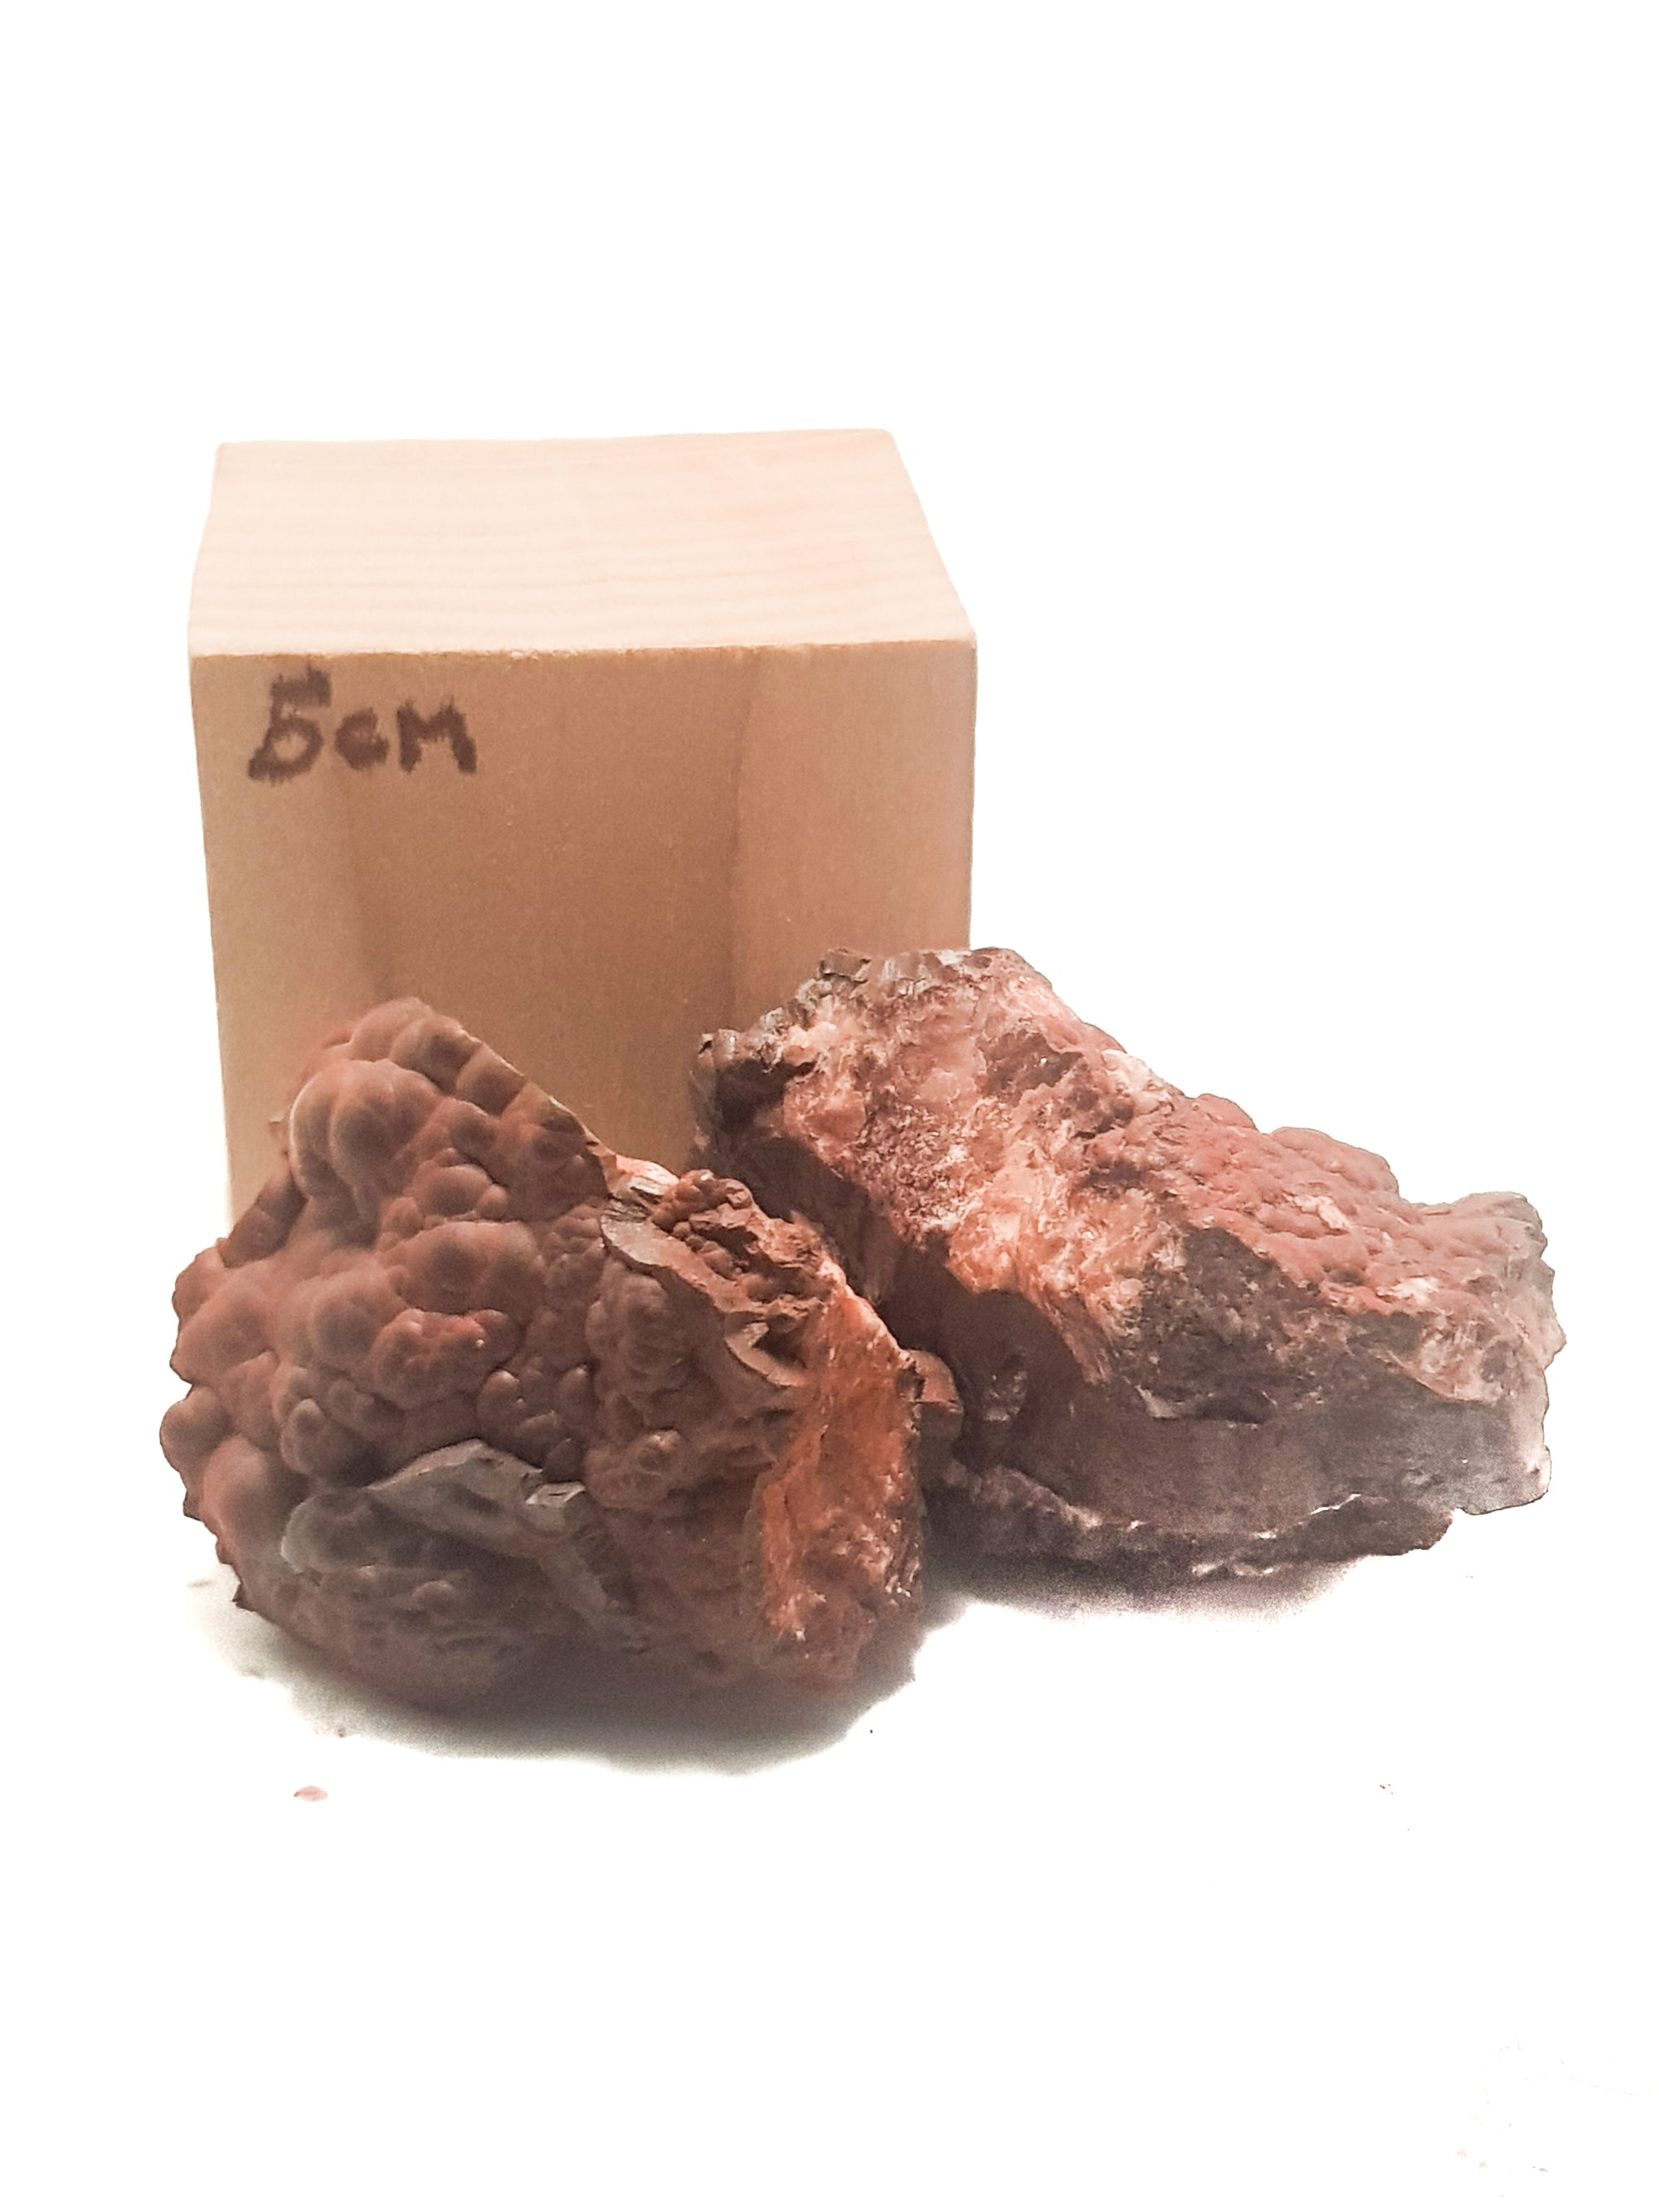 two samples of raw bottroydial hematite. One sample shows the bubbly surface, the other sample shows that the bubbles are layered when cut through. The samples are not to a wooden cube which states that it is 5cm. It is given for scale.